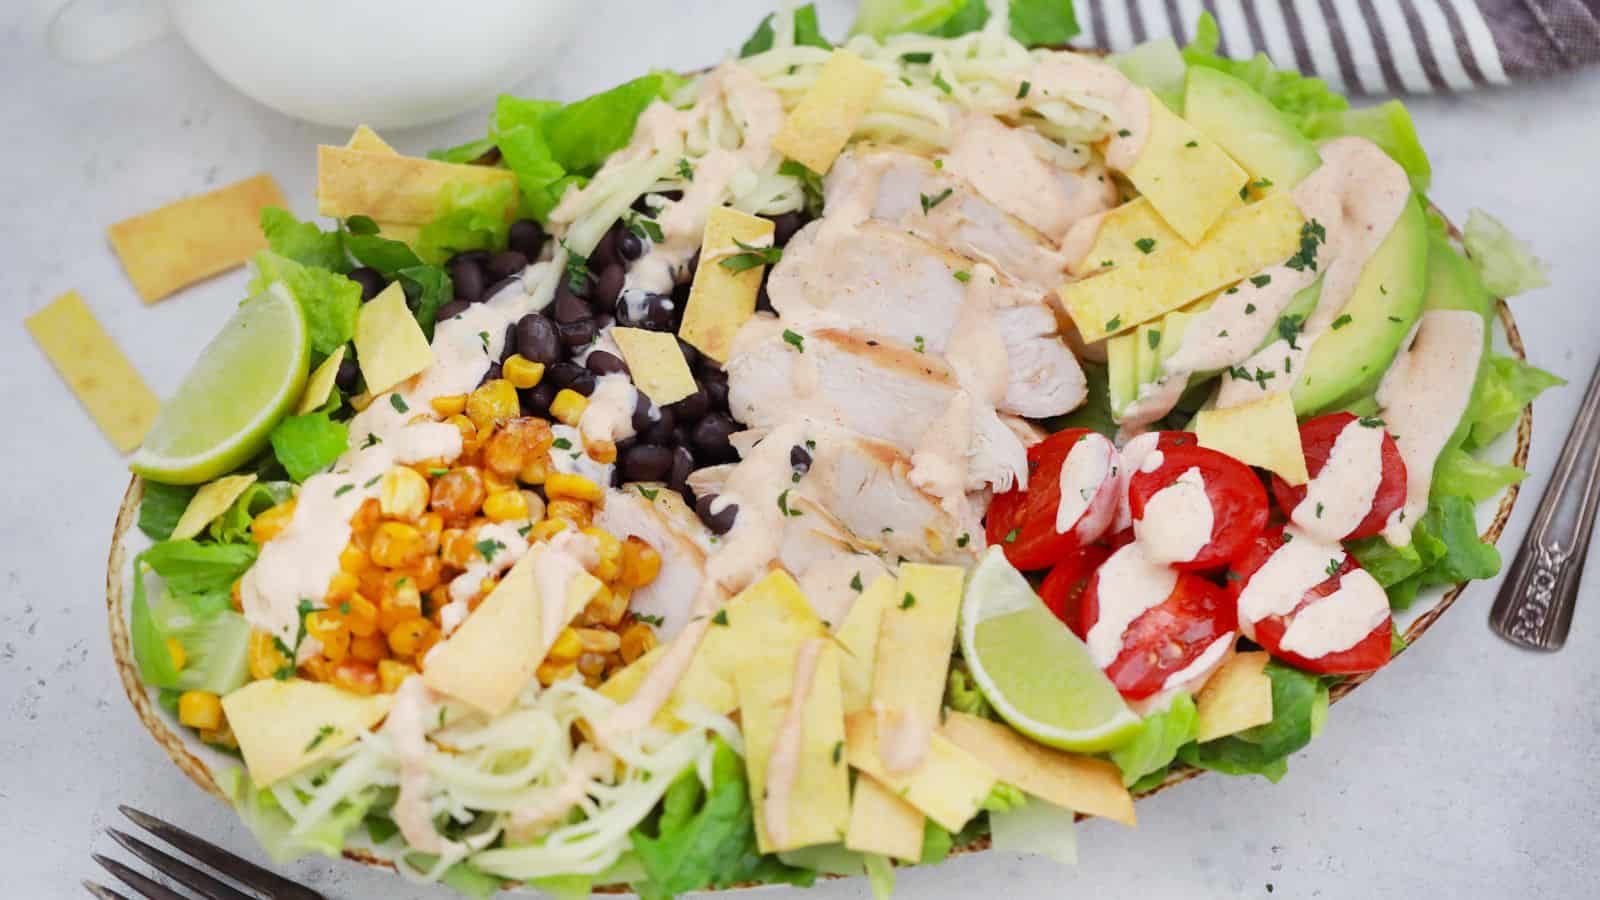 A colorful chicken salad with avocado, black beans, corn, cherry tomatoes, and lime slices, presented in a white bowl.